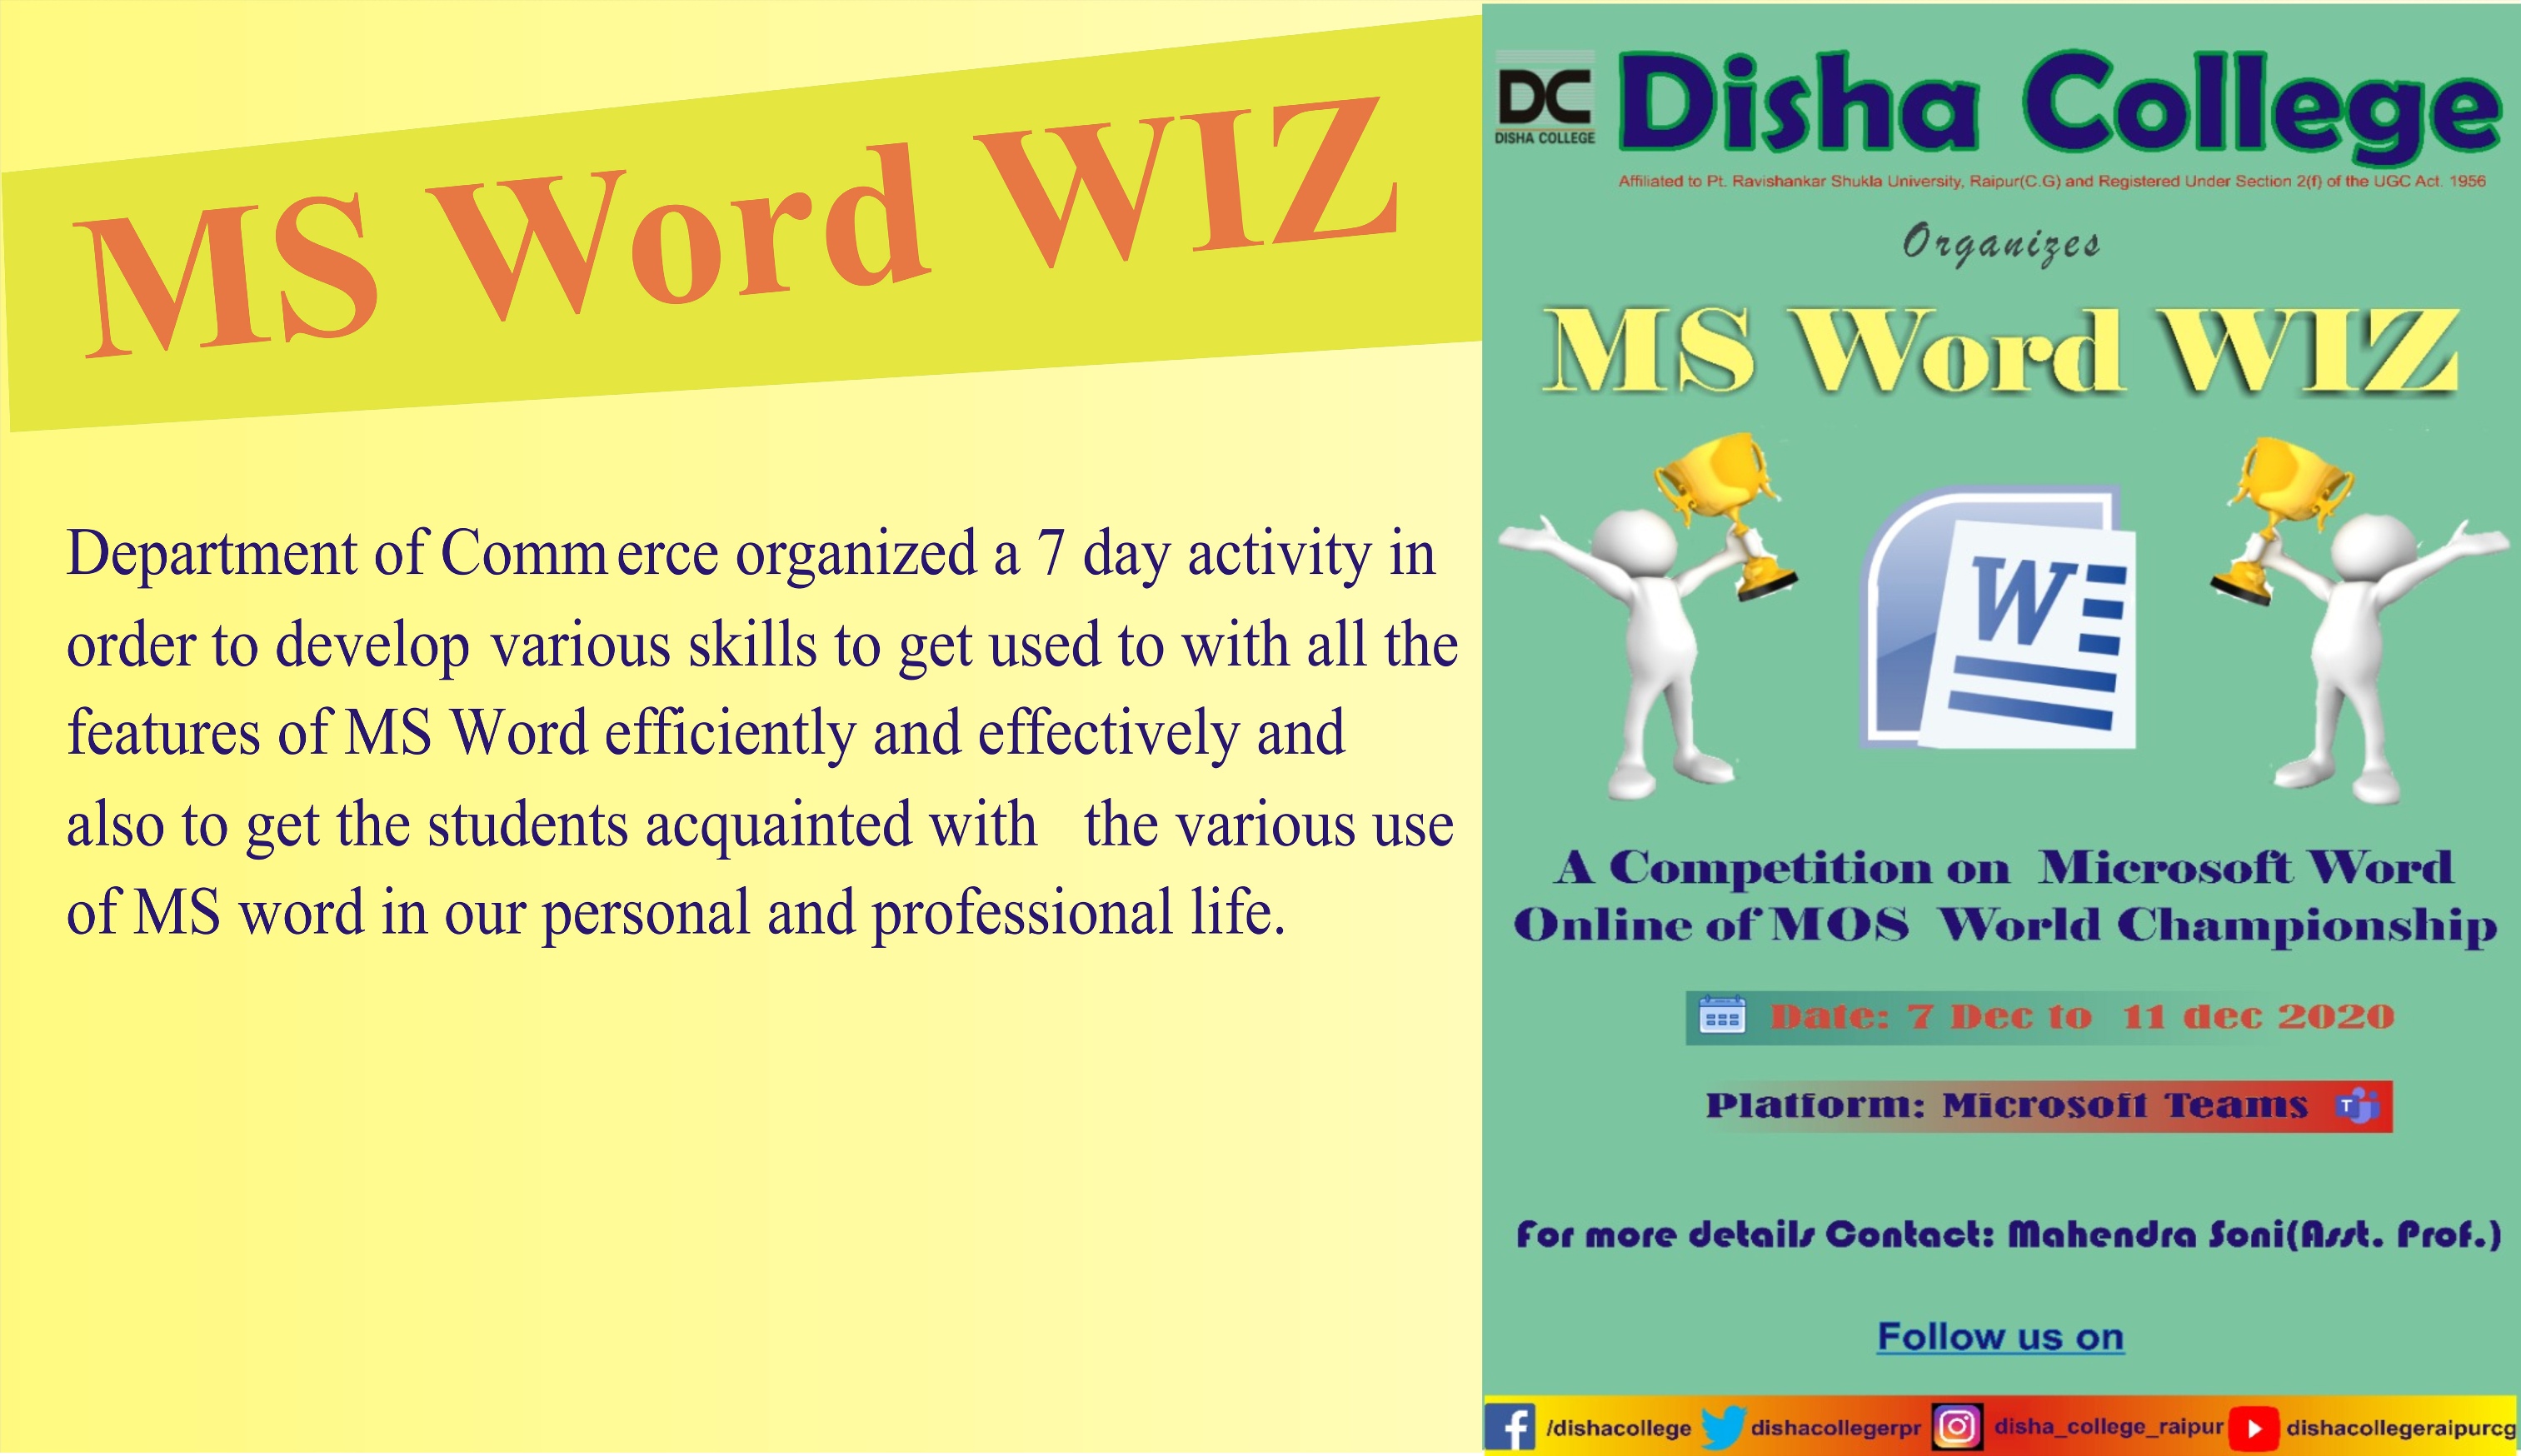 Department of Commerce organized MS Word Wiz Activity